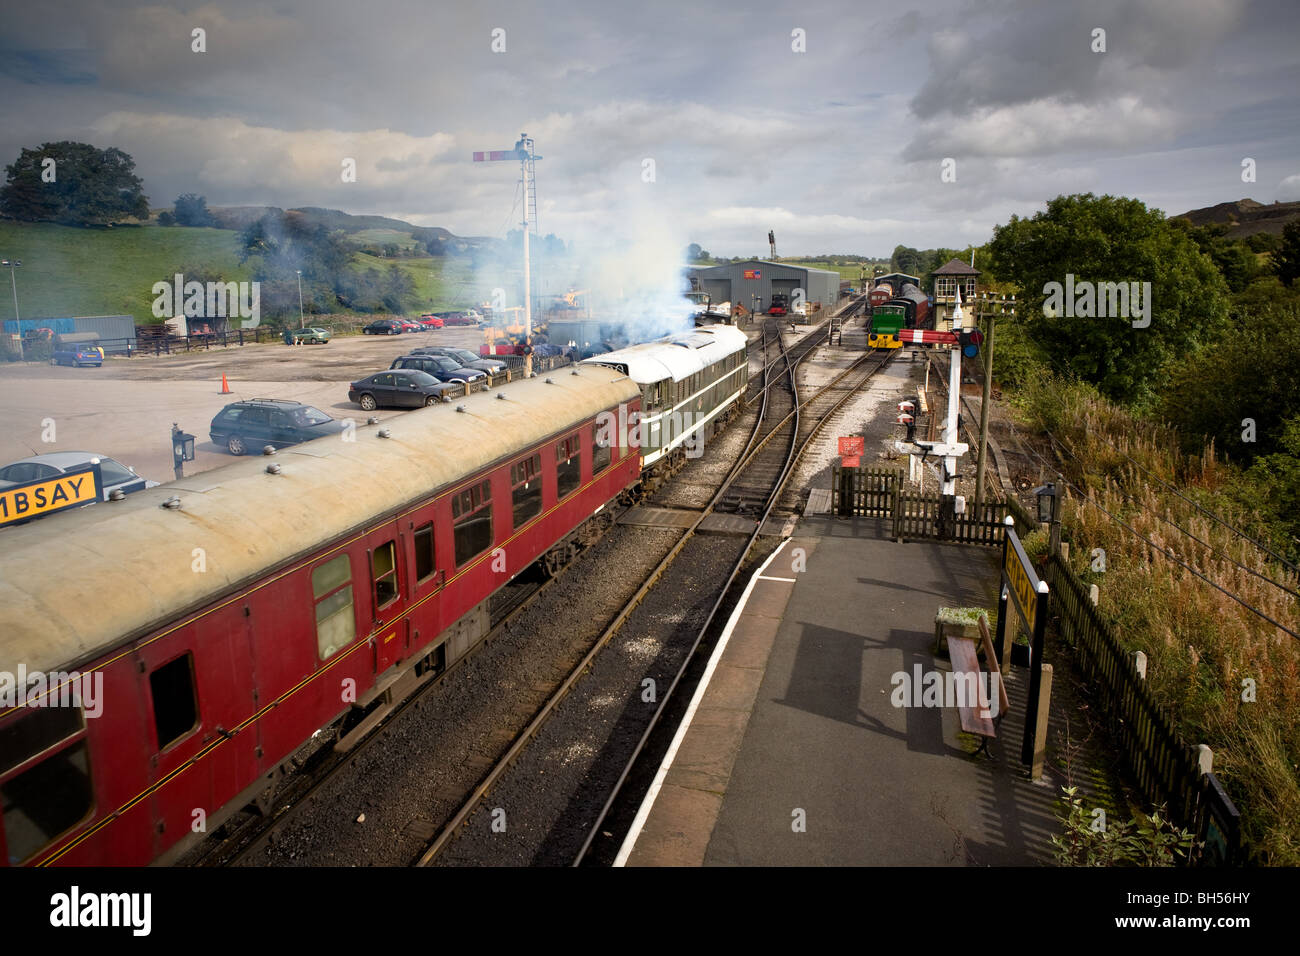 D5600 Type 31 Loco Leaving Embsay Station, Embsay & Bolton Abbey Steam Railway, Yorkshire Dales, England Stock Photo